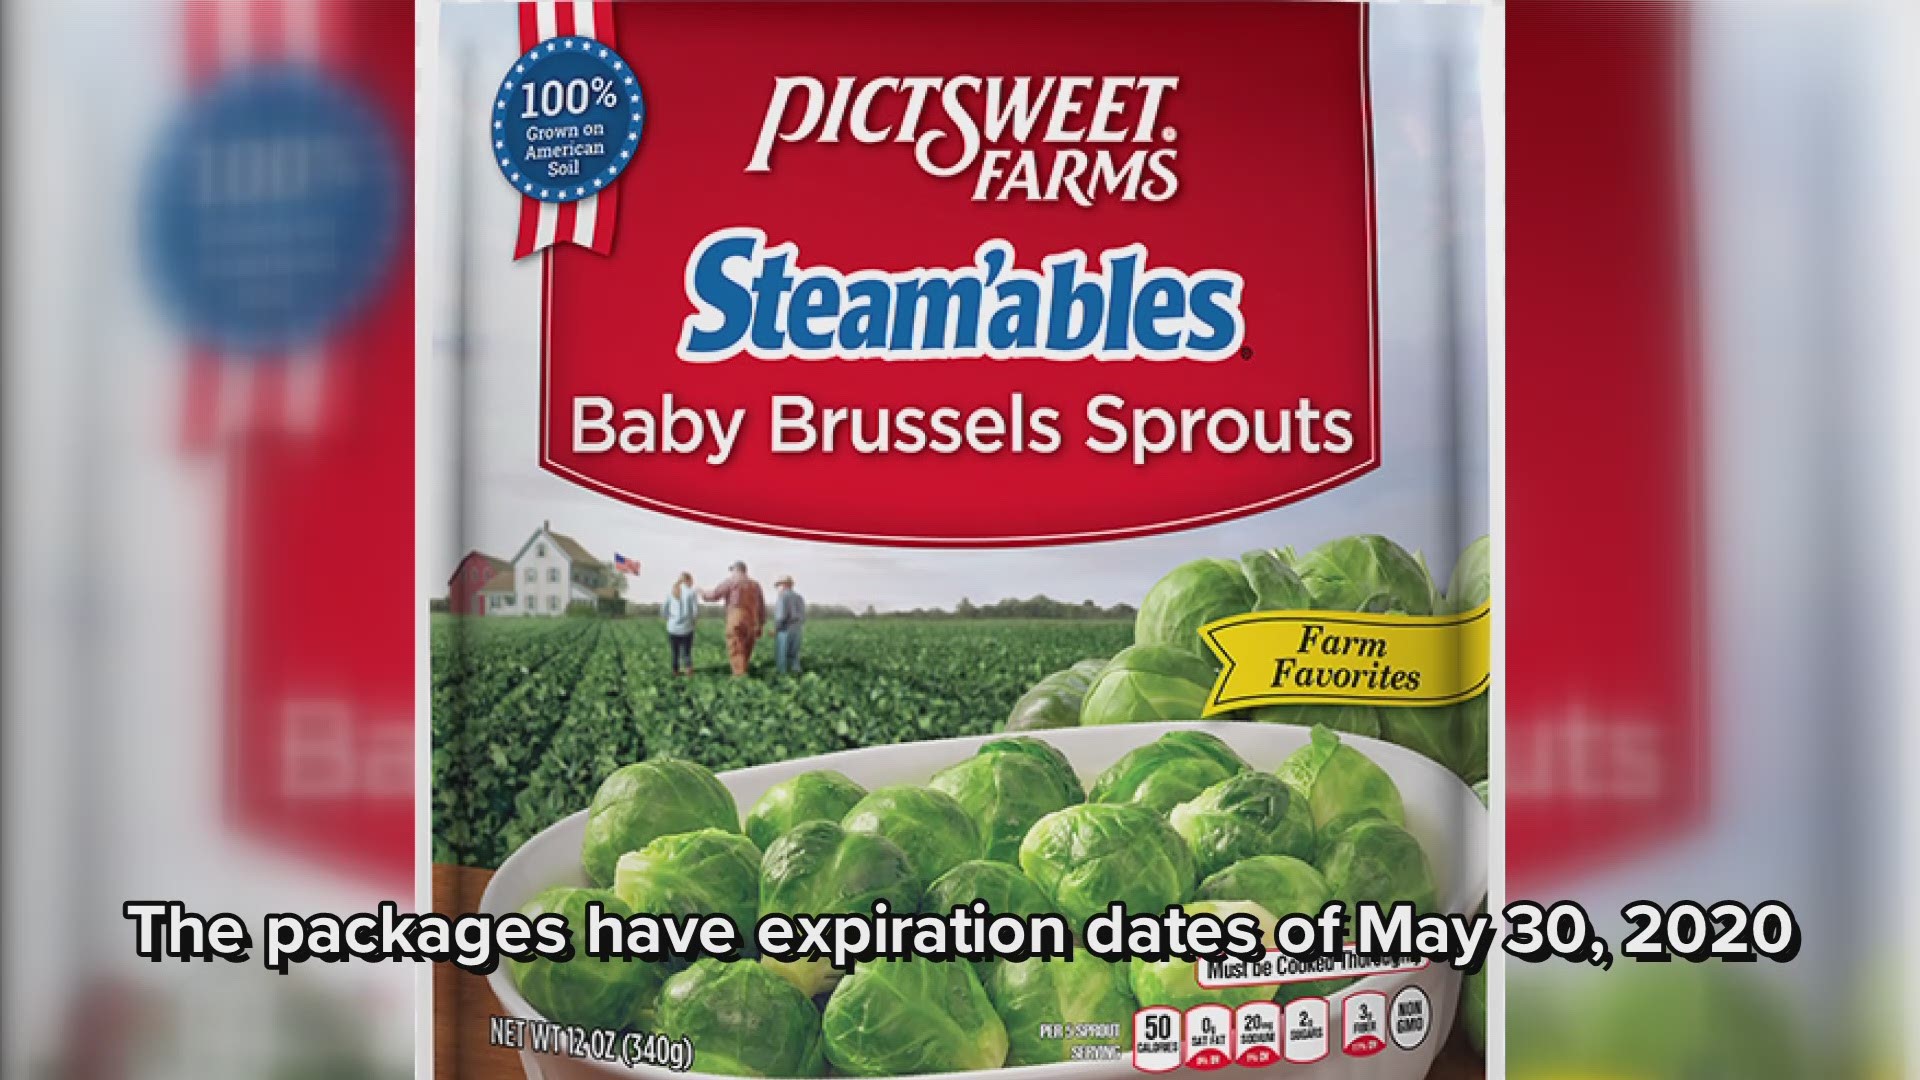 Pictsweet Farms issues recall on frozen Brussels sprouts sold in Ohio